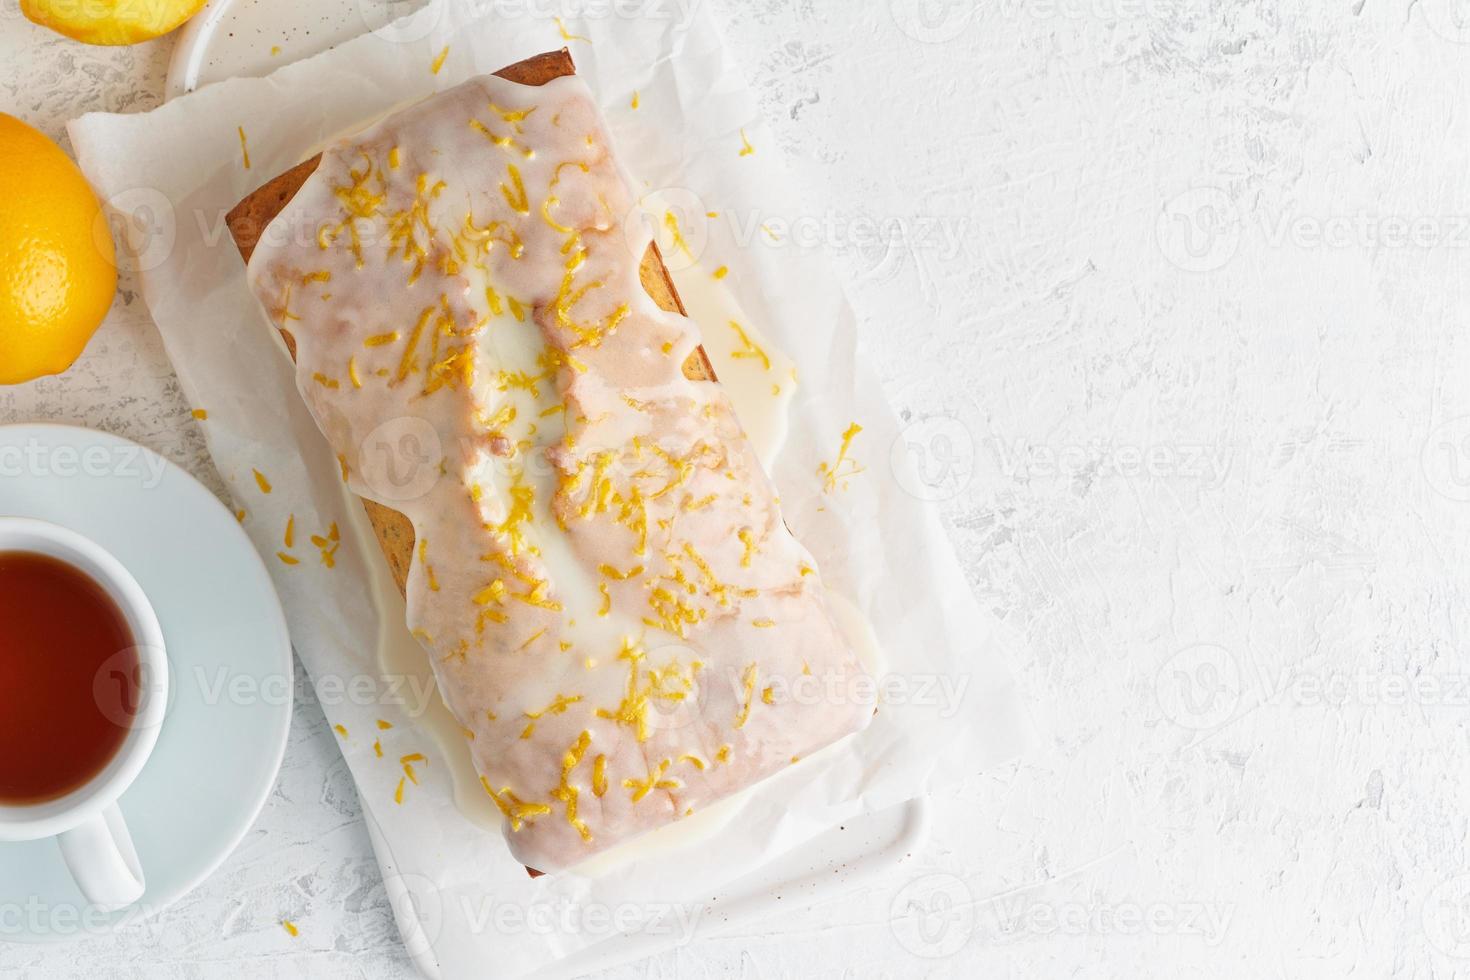 Lemon bread coated with sugar sweet icing and sprinkled with lemon peel. Cake citrus, copy space photo